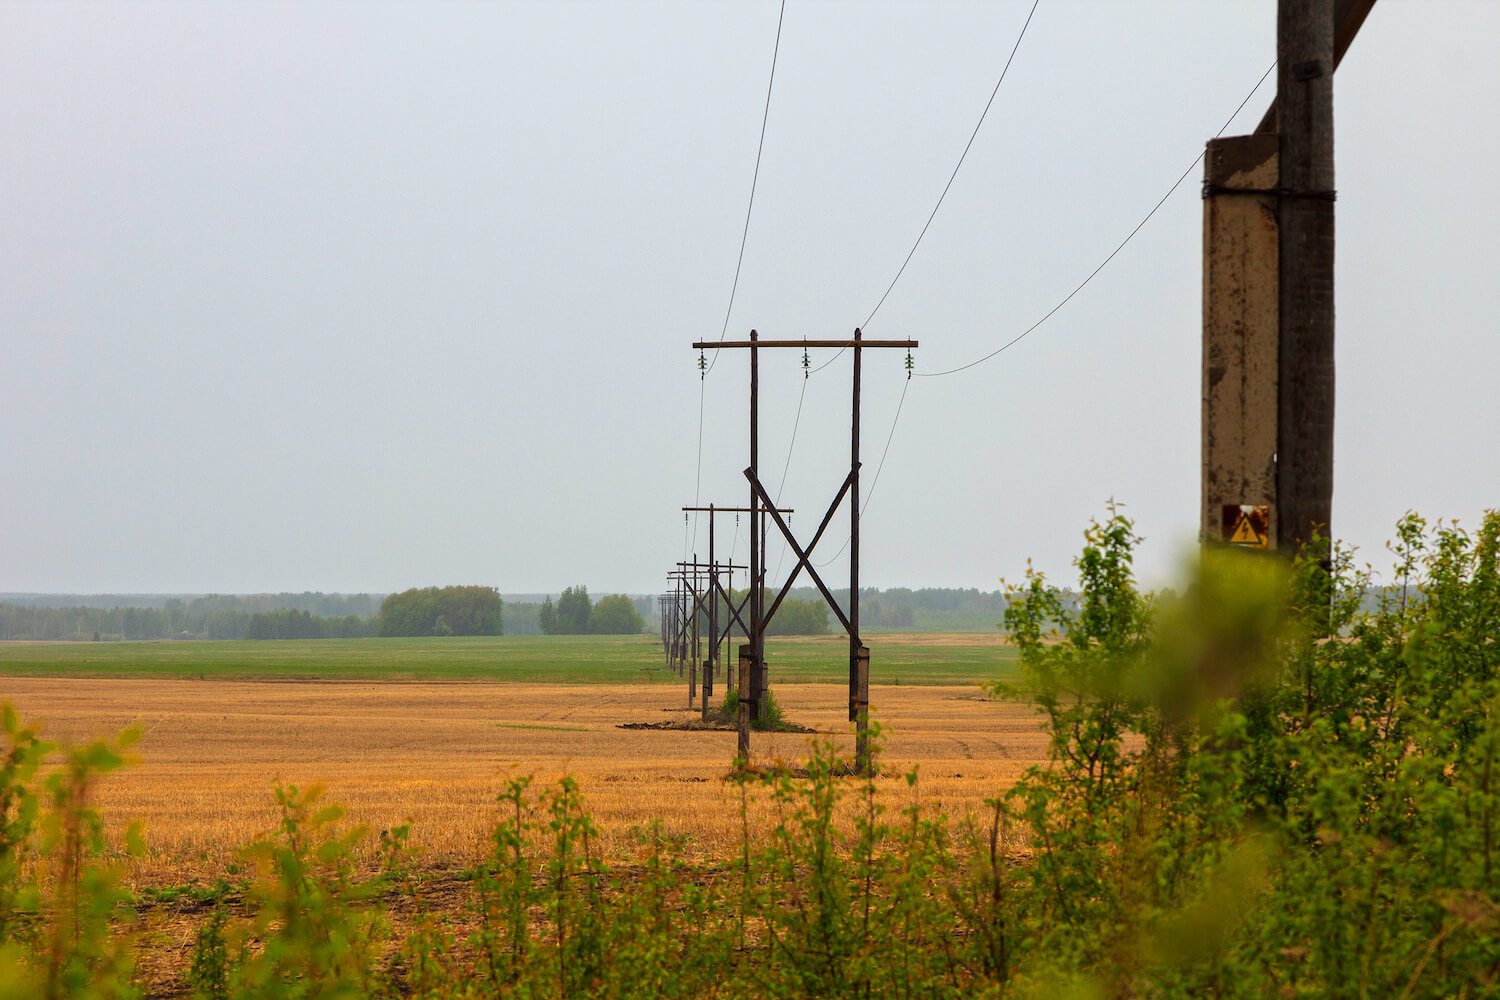 A power line in a rural area. October 2020